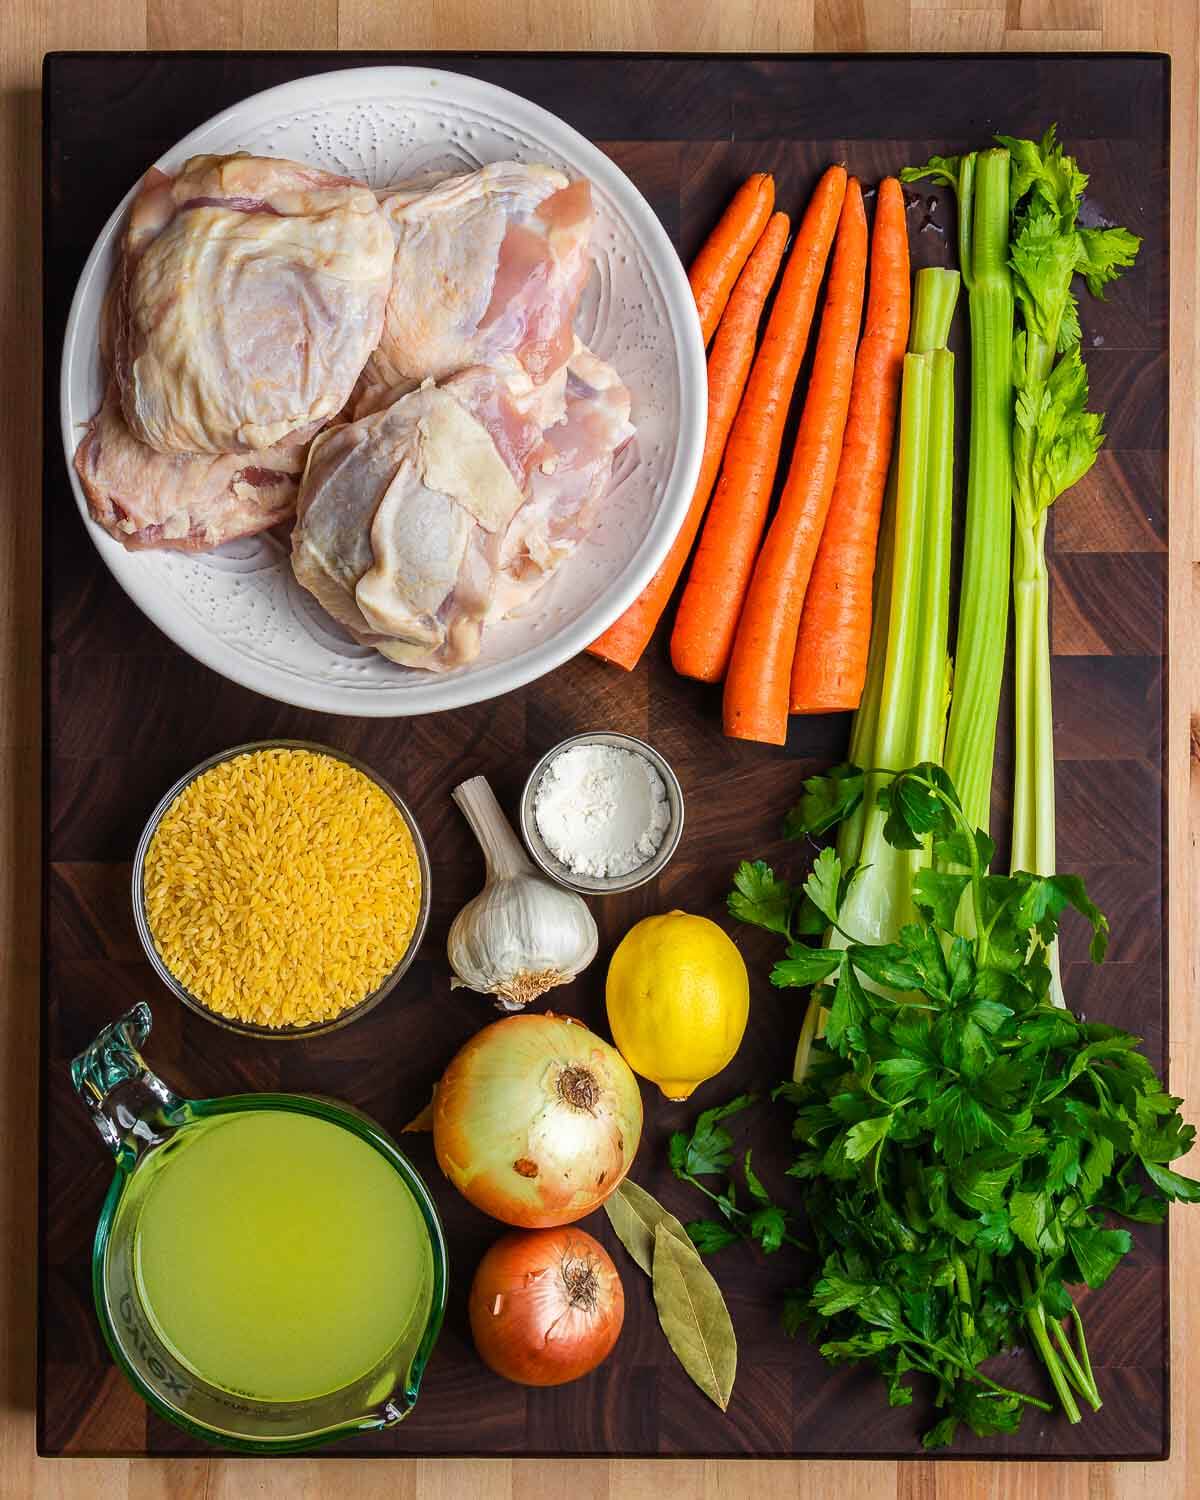 Ingredients shown: chicken thighs, carrots, celery, orzo, onions, chicken stock, lemon, garlic, flour, and parsley.